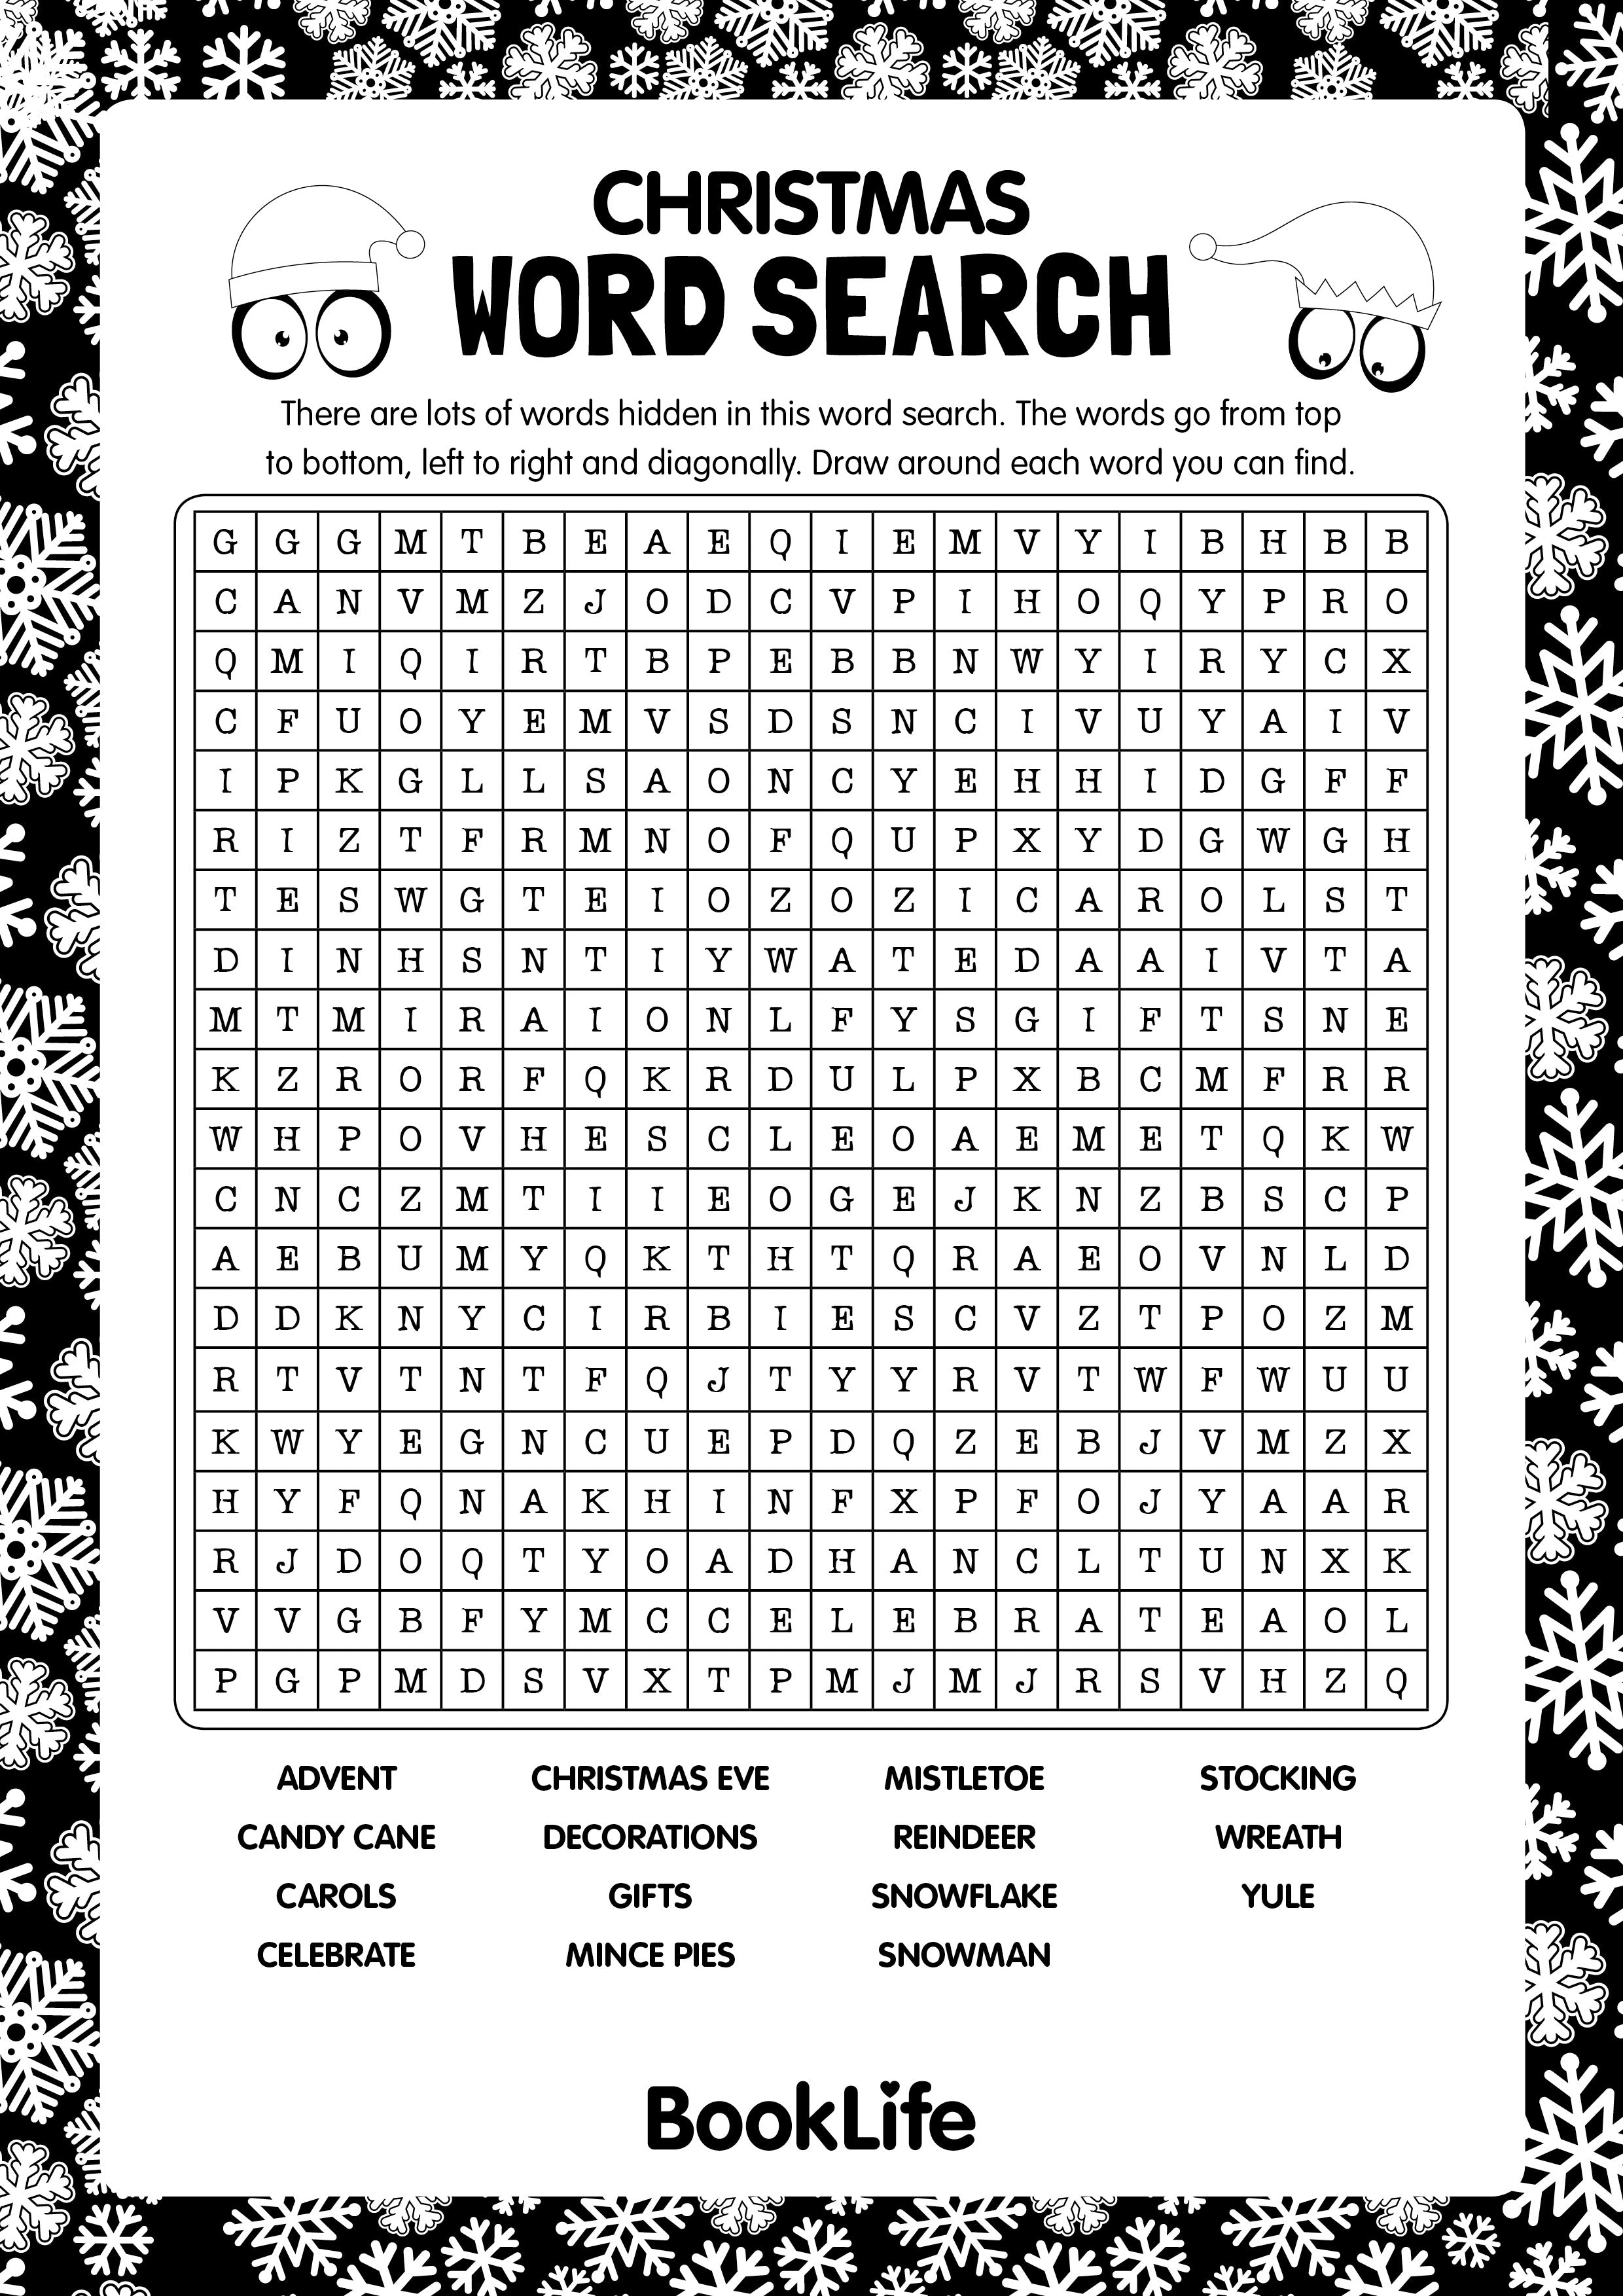 Free Christmas Word Search by BookLife